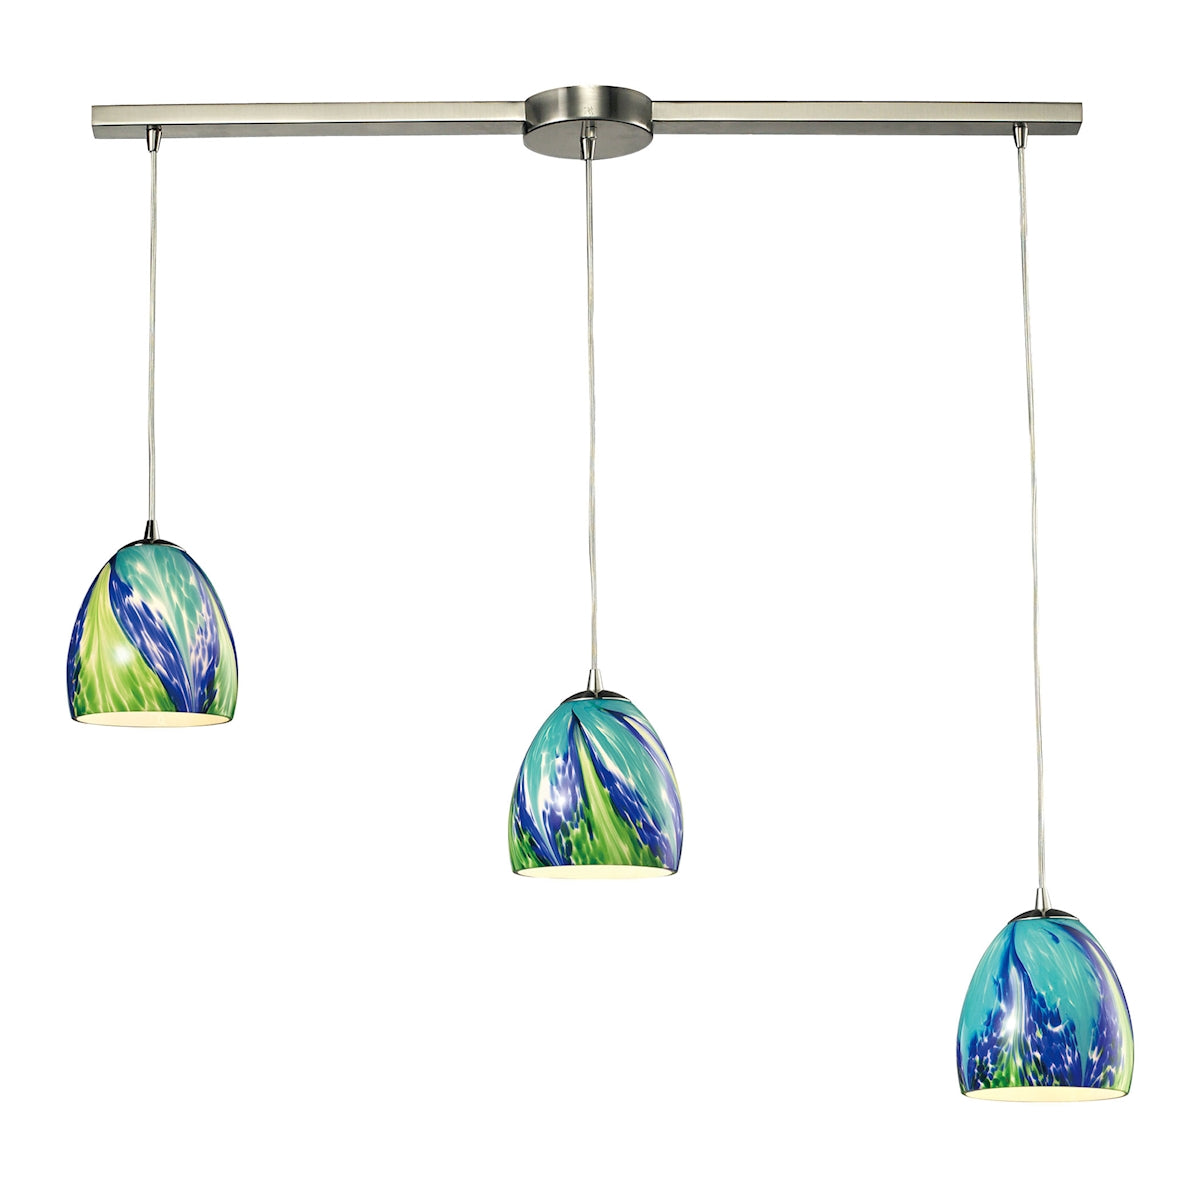 Colorwave 3-Light Linear Pendant Fixture in Satin Nickel with Blue and Green Glass